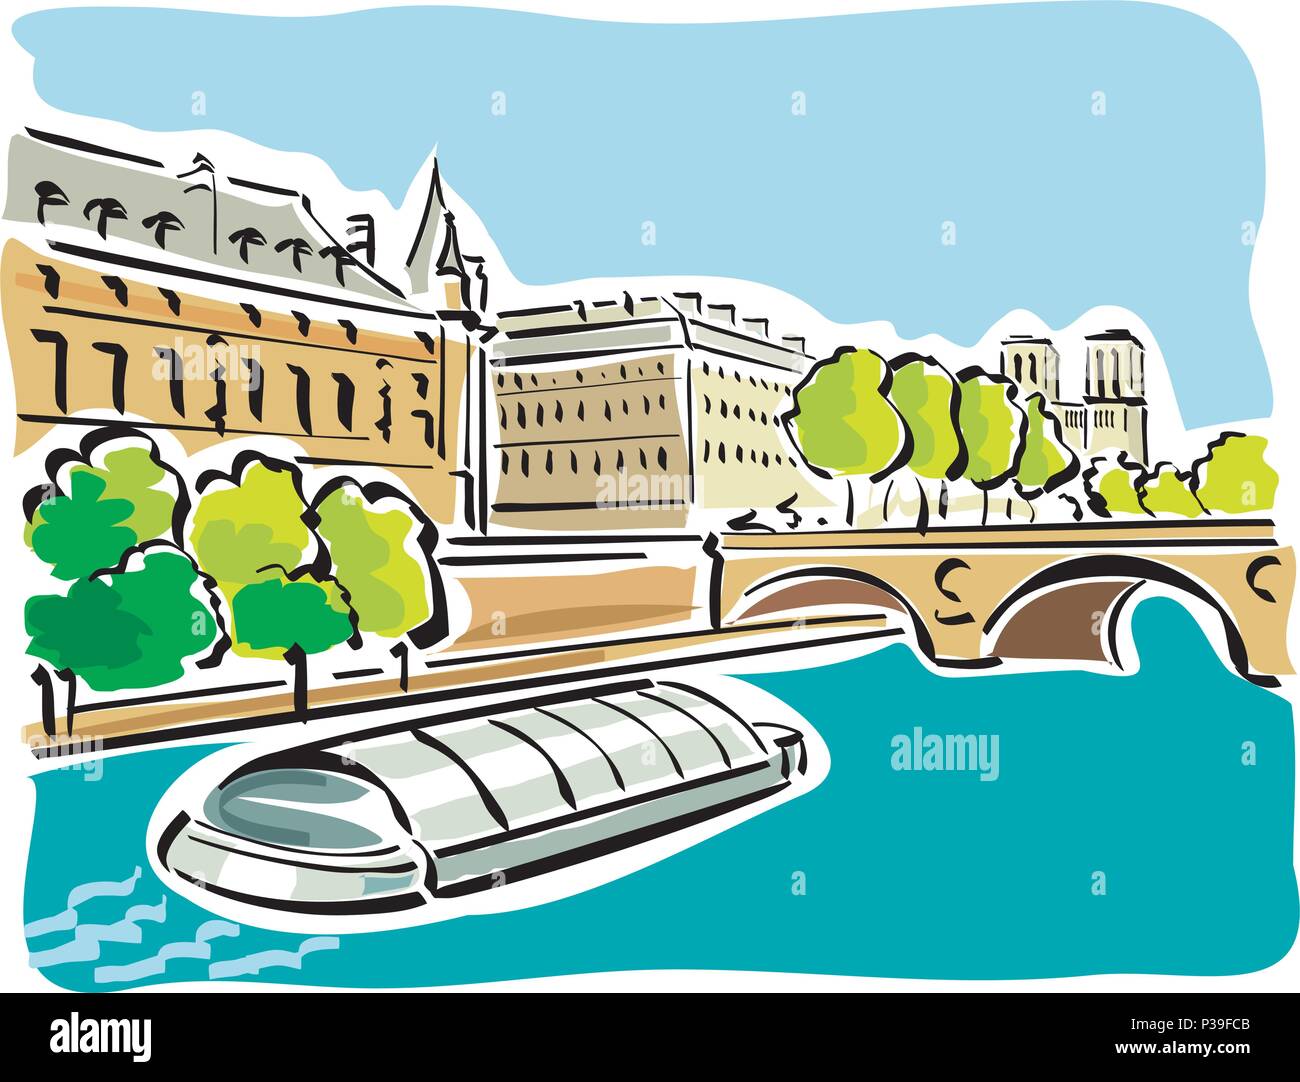 vector illustration of the Bateaux Mouches on the seine river in paris Stock Vector